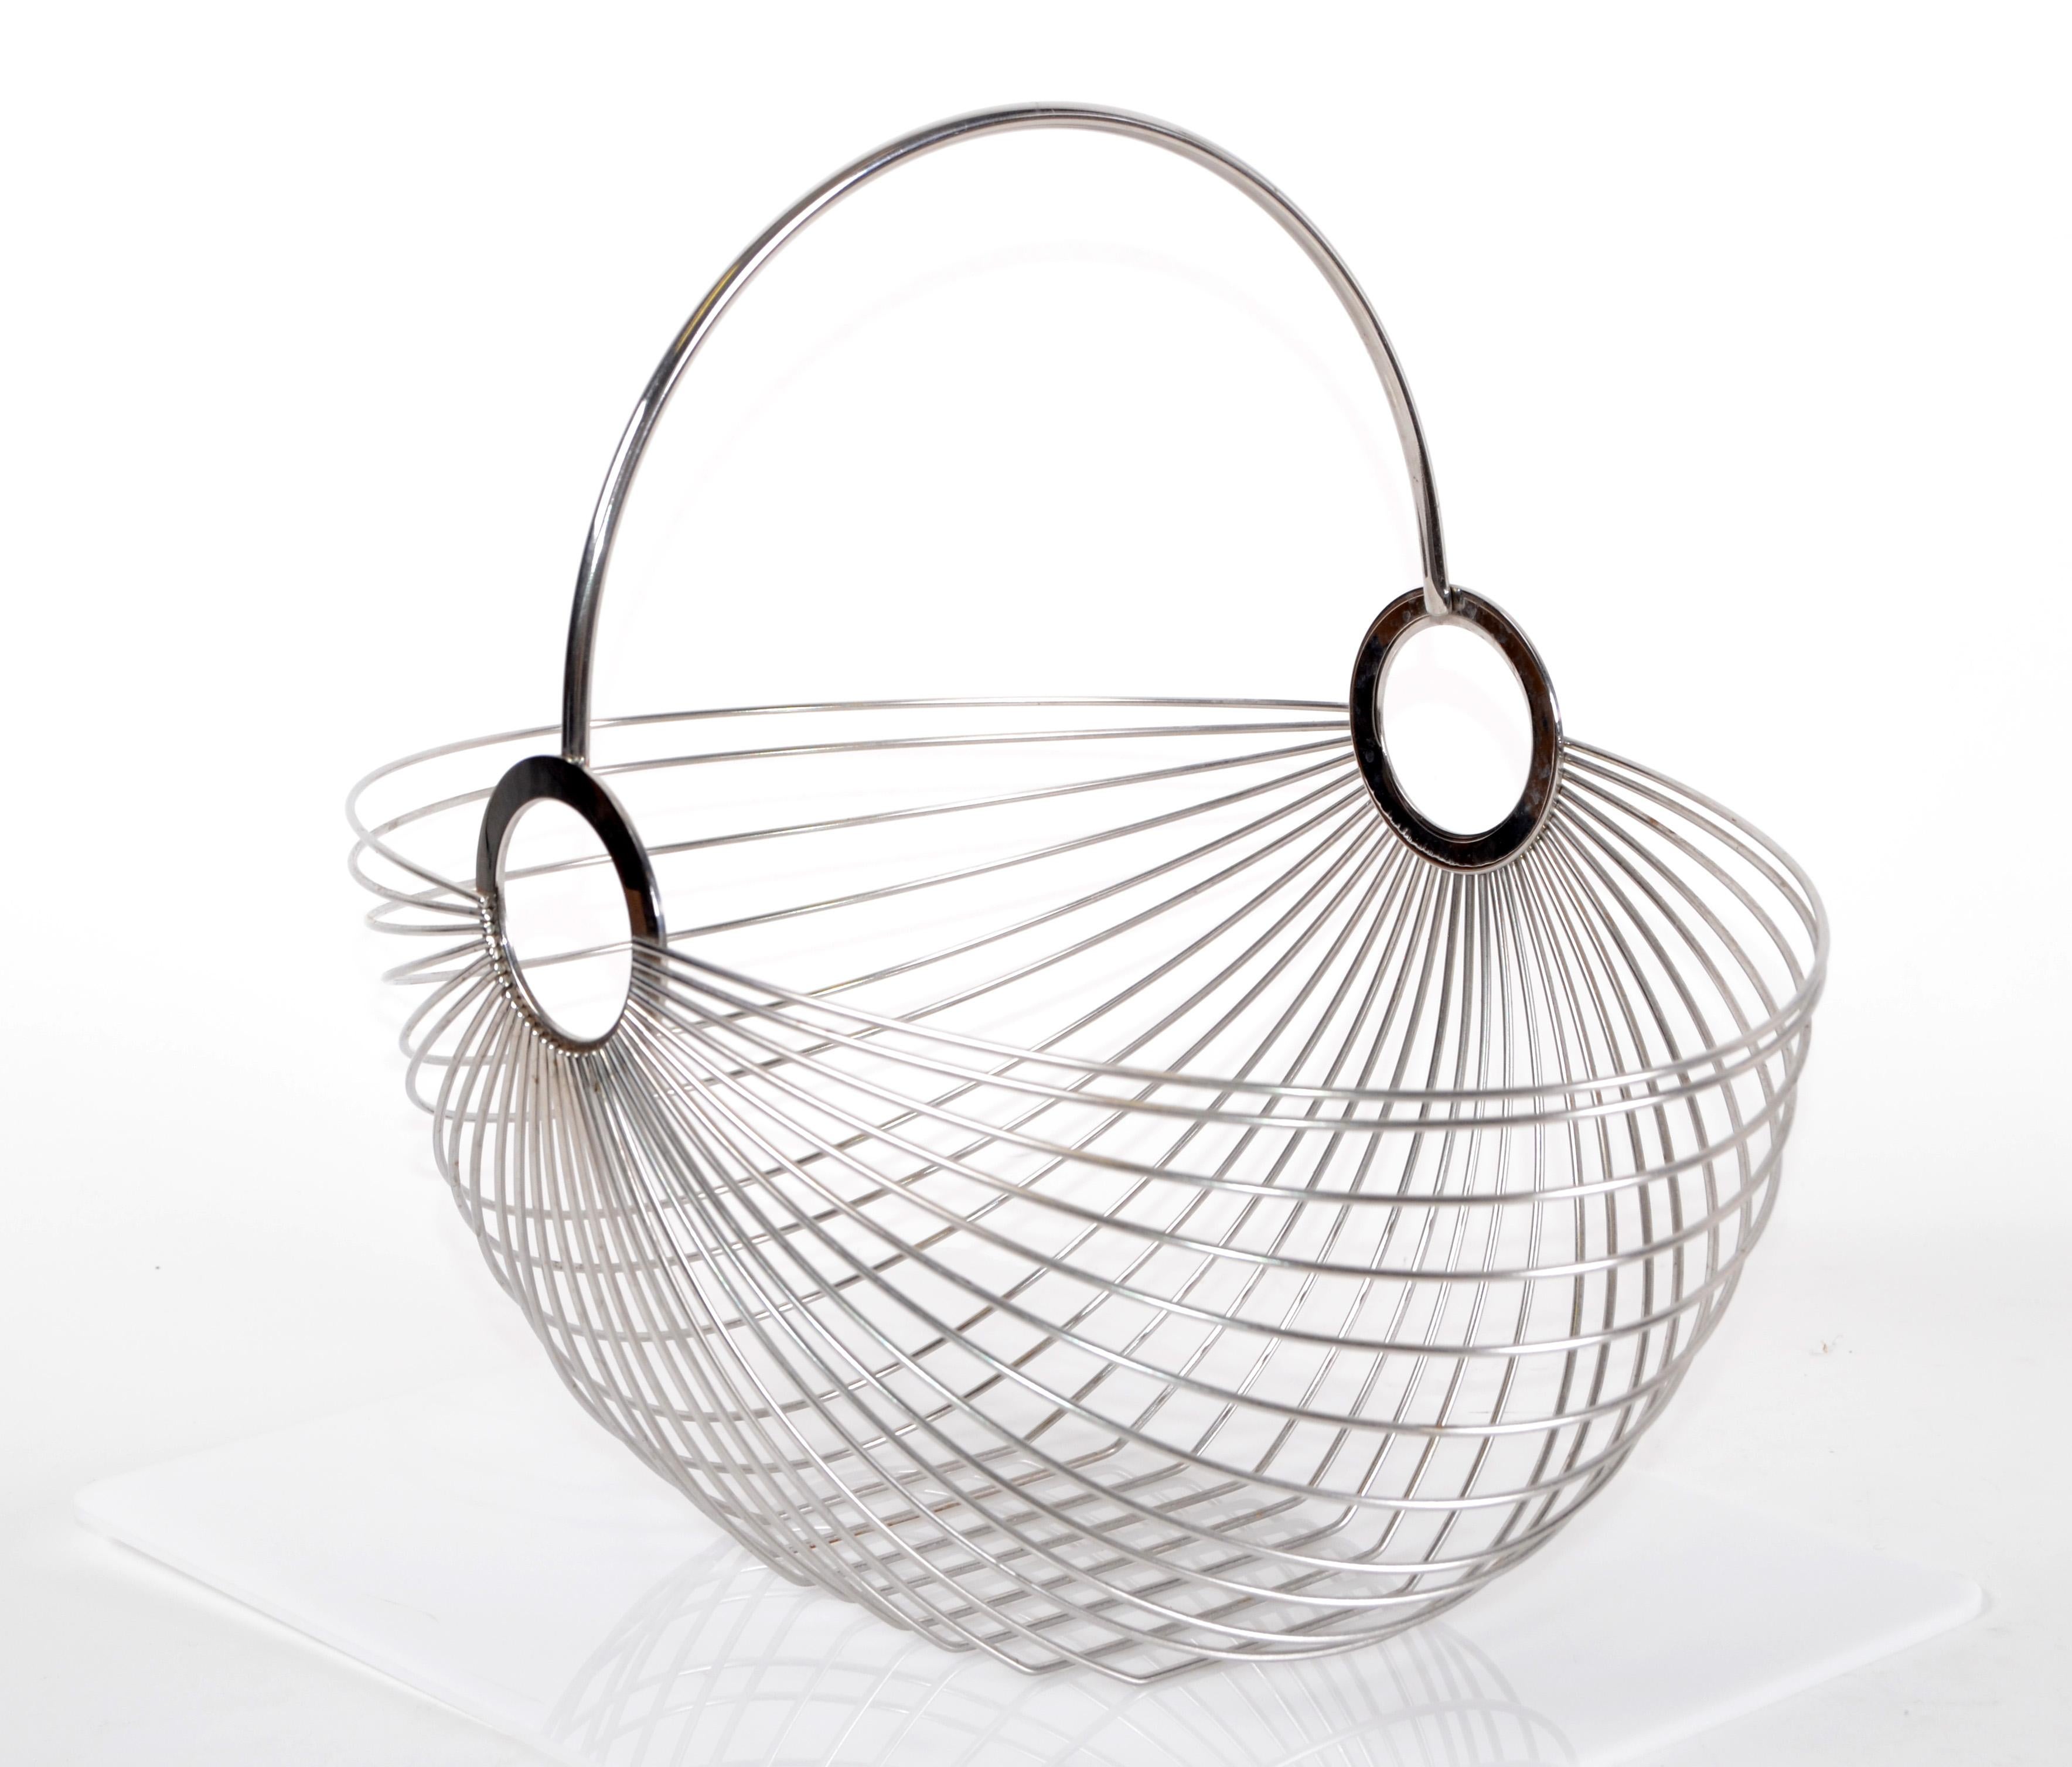 Made in Denmark this stunning stainless-steel fruit basket designed by Ole Palsby Copenhagen Denmark.
Scandinavian Modern from the 1980s.
Makers Mark at the Ring.